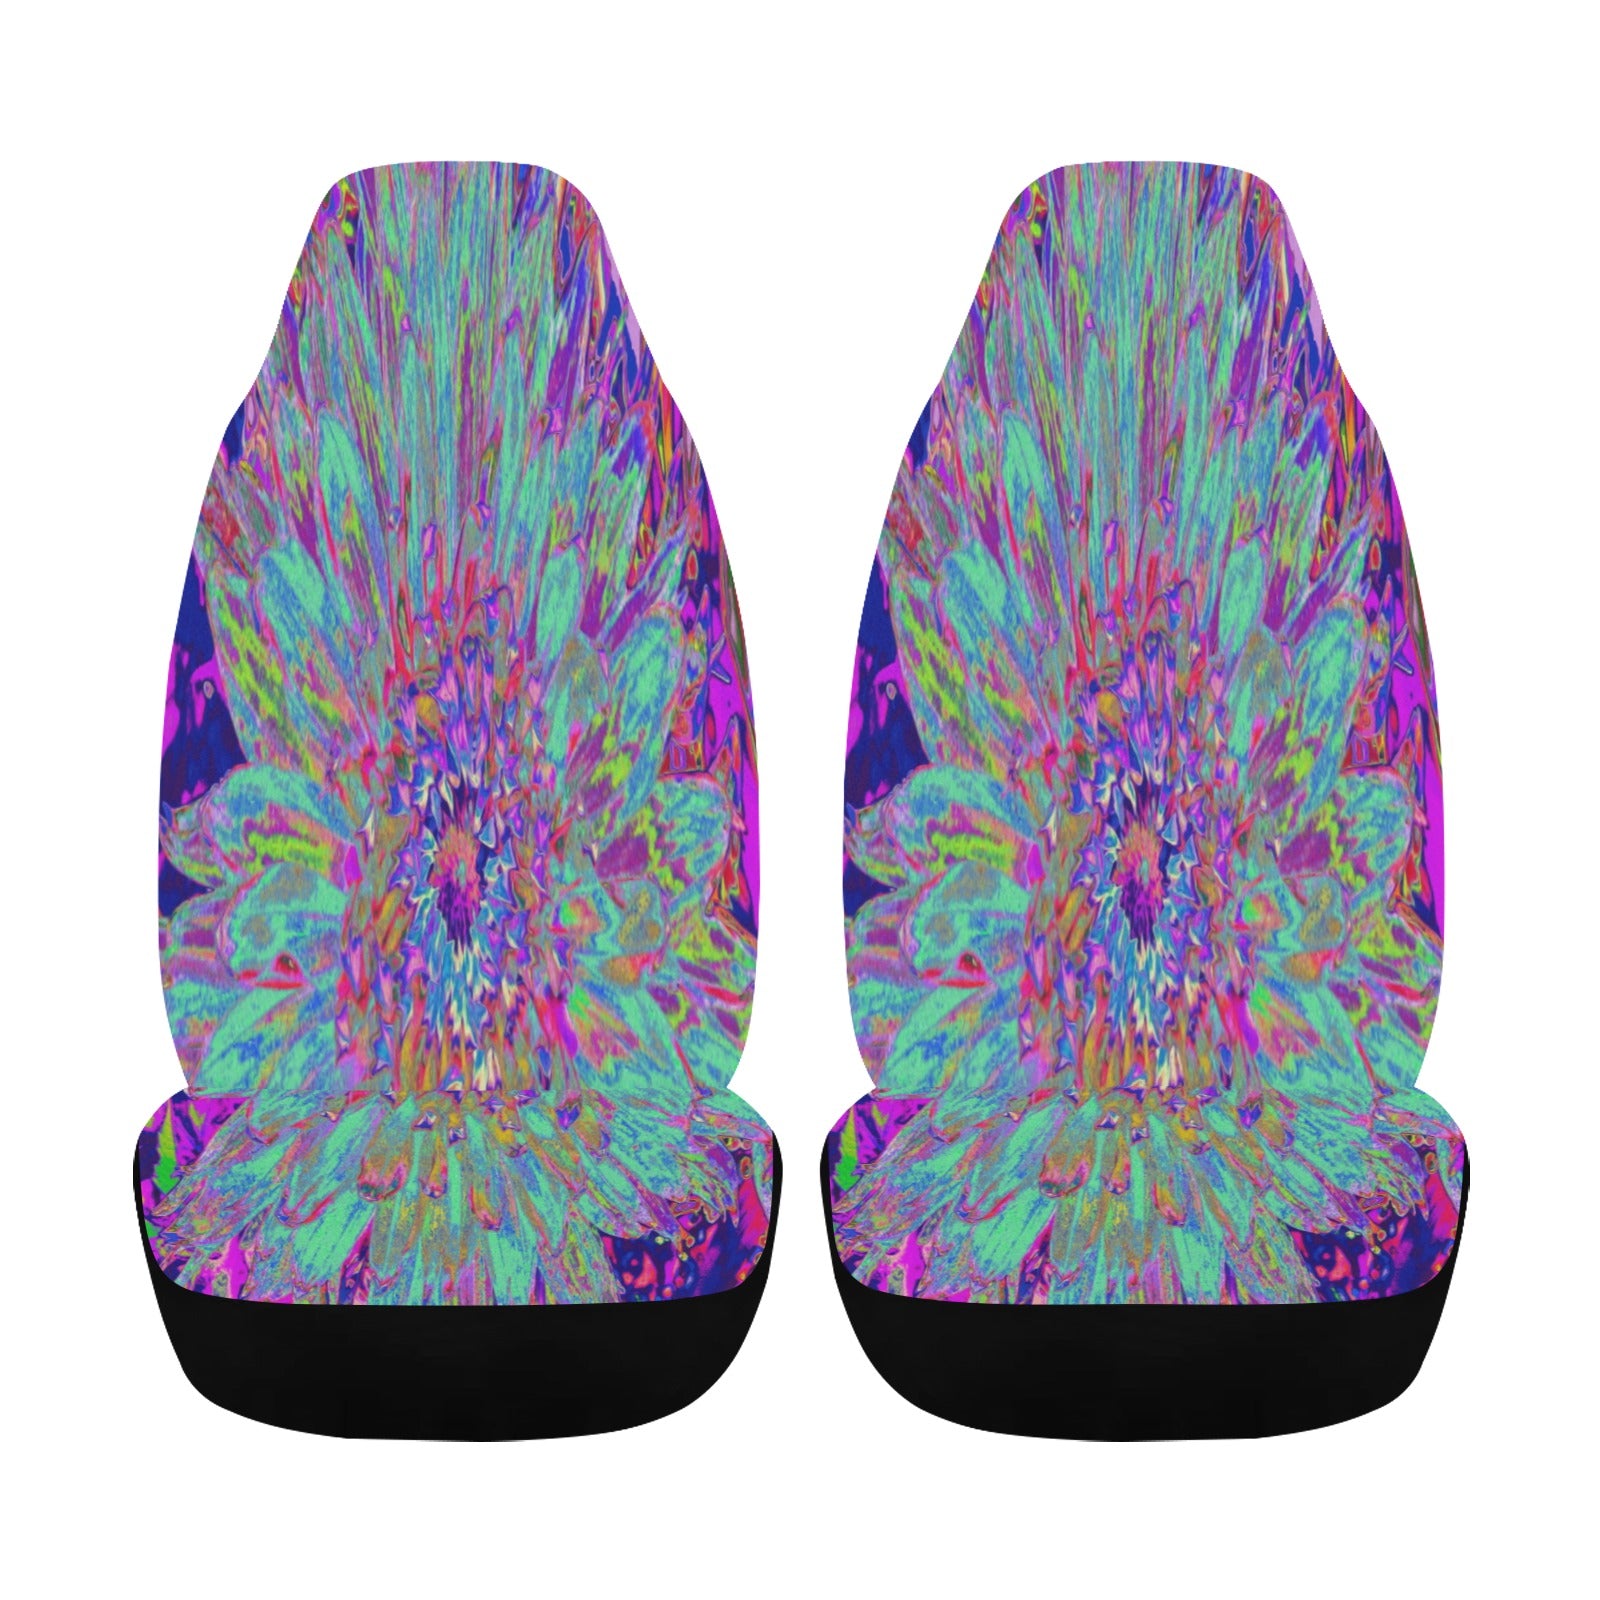 Colorful Car Seat Covers, Aquamarine Rainbow Color Abstract Dahlia Flower